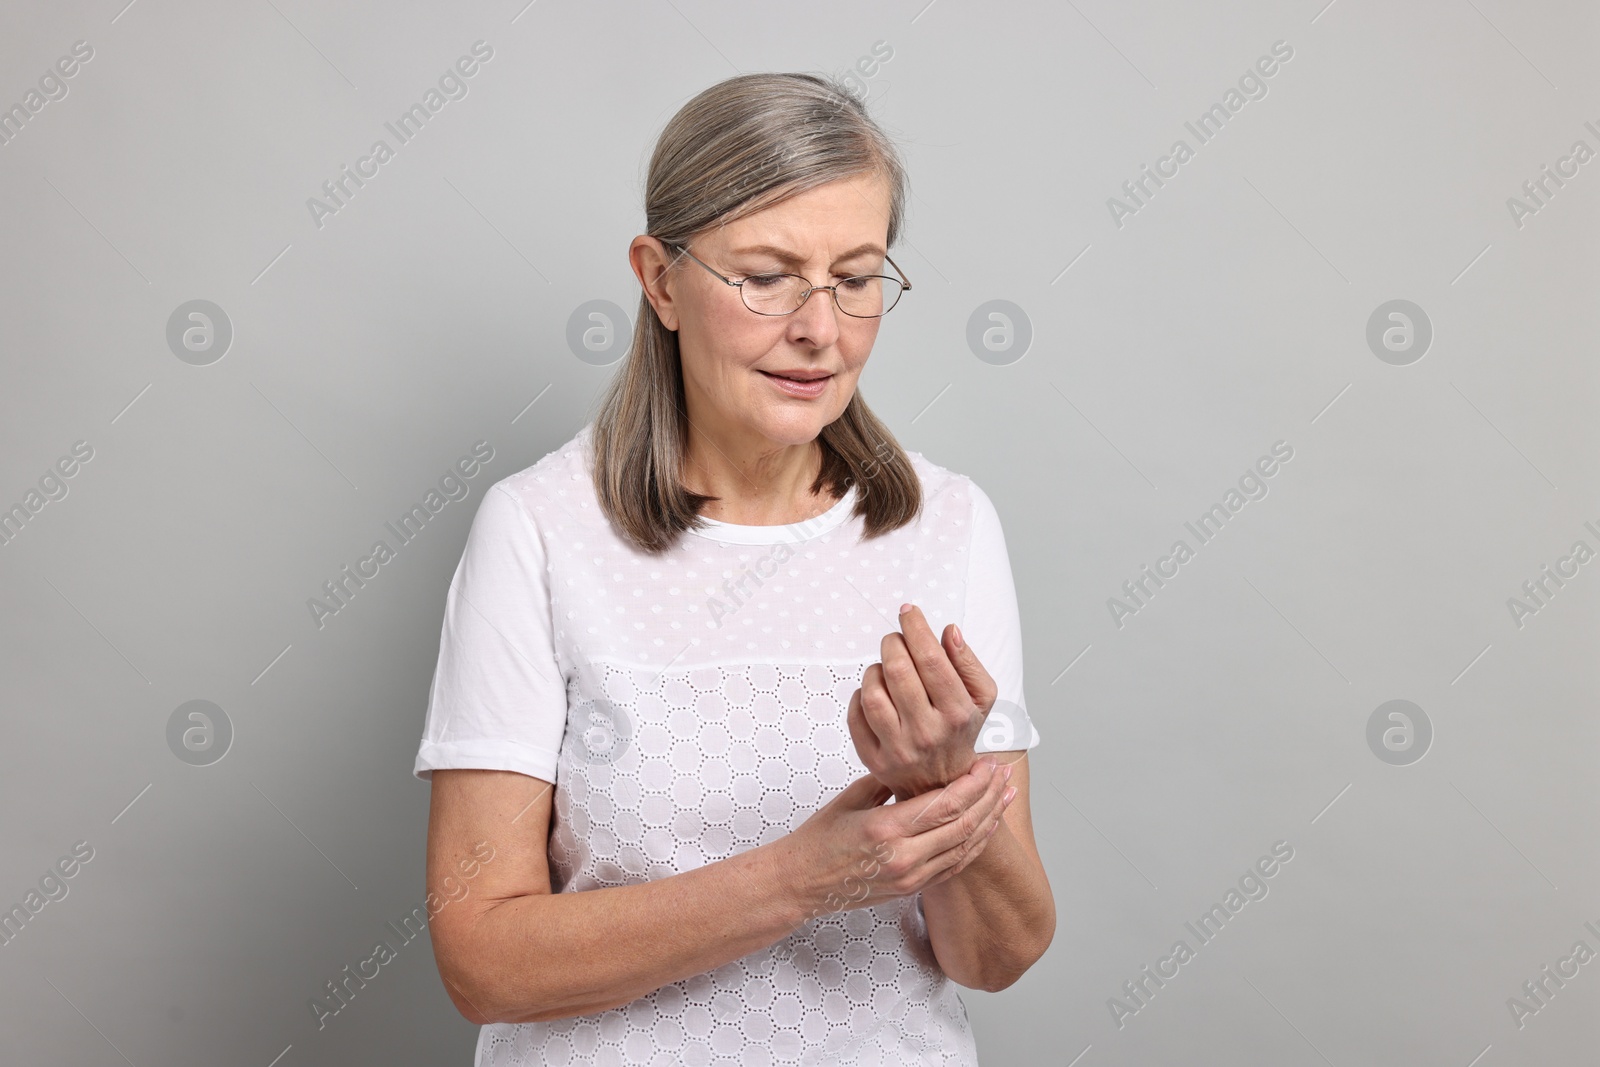 Photo of Arthritis symptoms. Woman suffering from pain in wrist on gray background